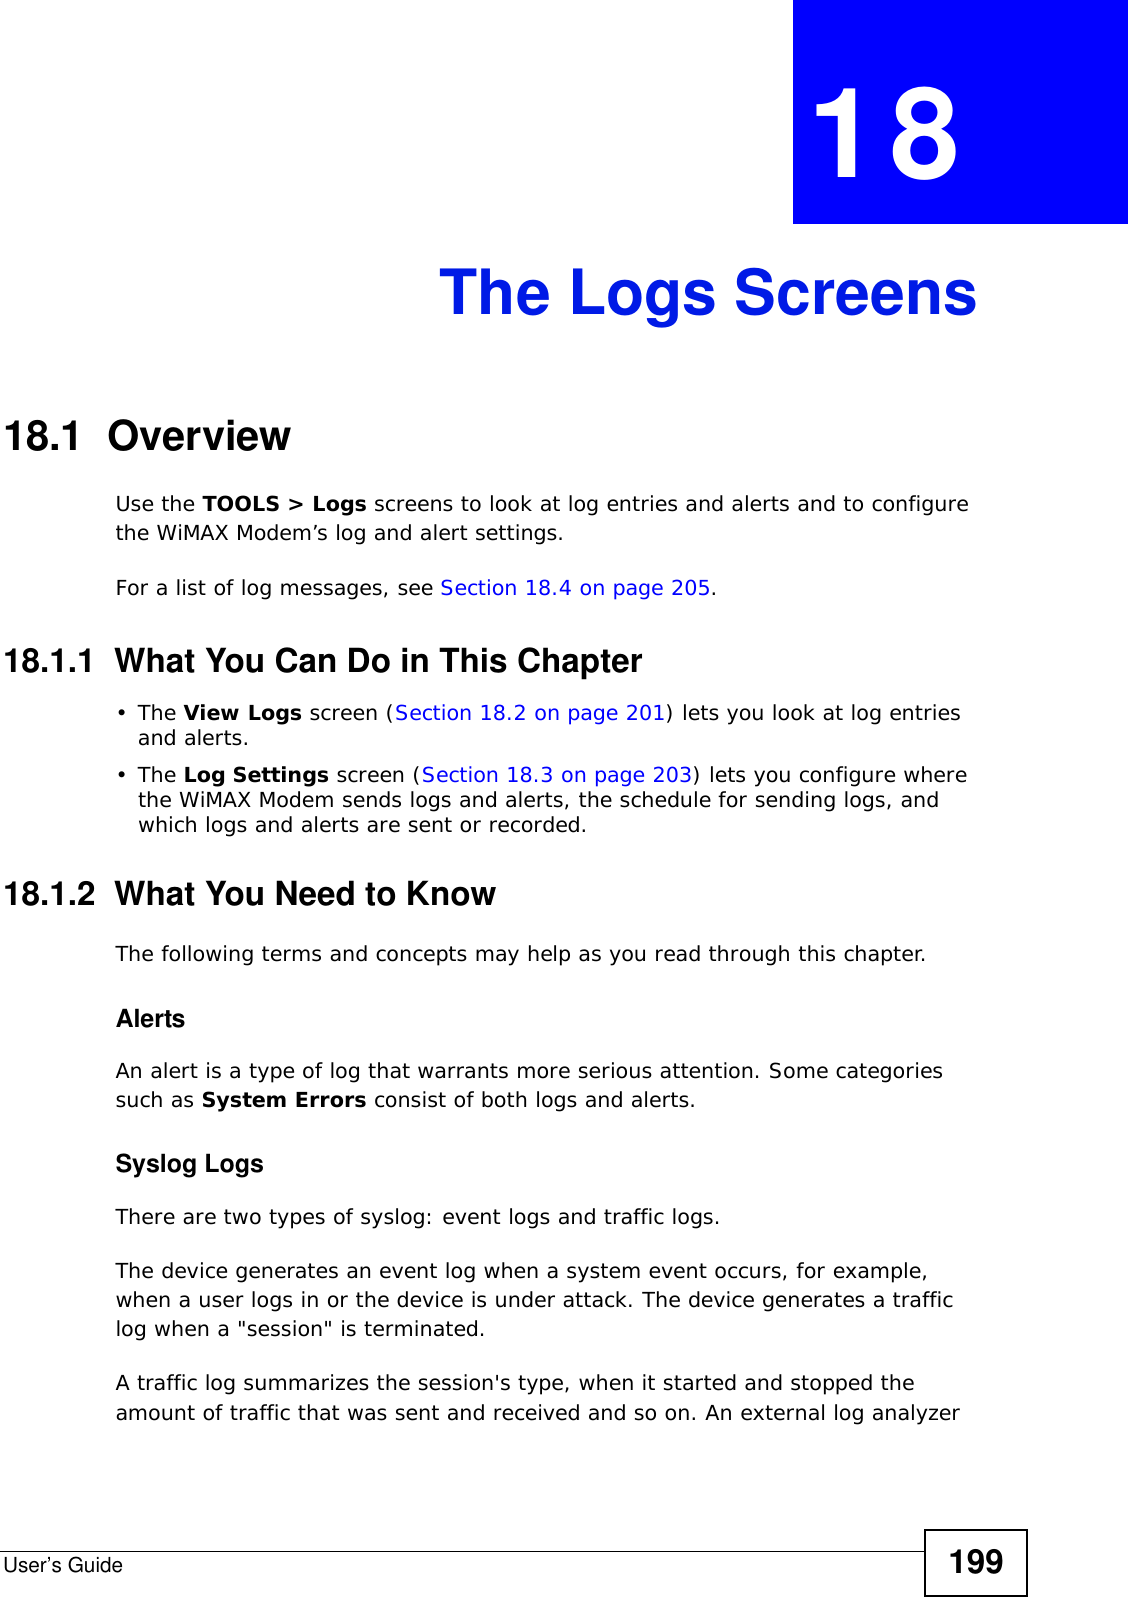 User’s Guide 199CHAPTER  18 The Logs Screens18.1  OverviewUse the TOOLS &gt; Logs screens to look at log entries and alerts and to configure the WiMAX Modem’s log and alert settings.For a list of log messages, see Section 18.4 on page 205.18.1.1  What You Can Do in This Chapter•The View Logs screen (Section 18.2 on page 201) lets you look at log entries and alerts.•The Log Settings screen (Section 18.3 on page 203) lets you configure where the WiMAX Modem sends logs and alerts, the schedule for sending logs, and which logs and alerts are sent or recorded.18.1.2  What You Need to KnowThe following terms and concepts may help as you read through this chapter.AlertsAn alert is a type of log that warrants more serious attention. Some categories such as System Errors consist of both logs and alerts.Syslog LogsThere are two types of syslog: event logs and traffic logs. The device generates an event log when a system event occurs, for example, when a user logs in or the device is under attack. The device generates a traffic log when a &quot;session&quot; is terminated. A traffic log summarizes the session&apos;s type, when it started and stopped the amount of traffic that was sent and received and so on. An external log analyzer 